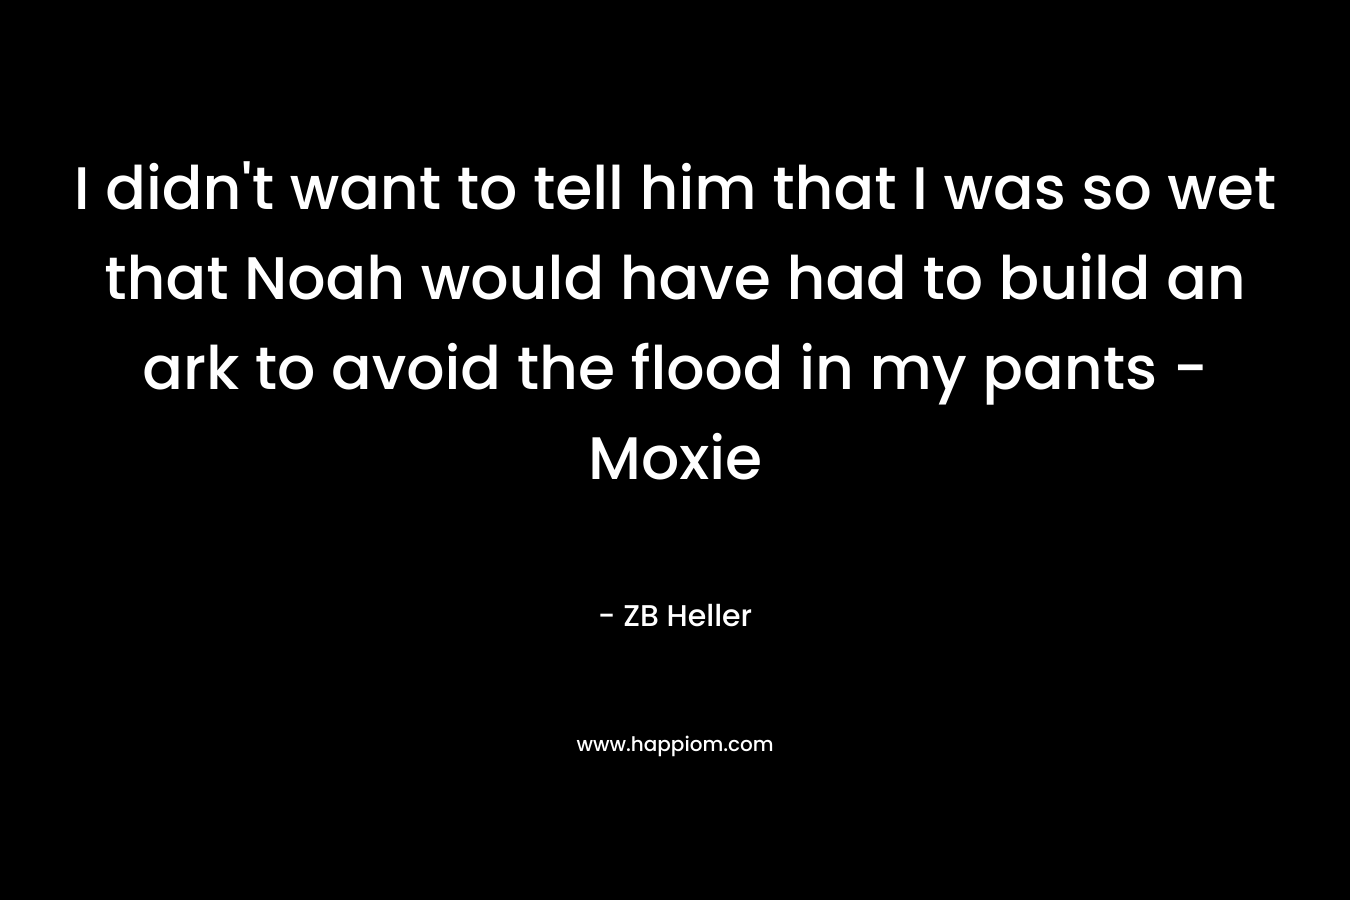 I didn’t want to tell him that I was so wet that Noah would have had to build an ark to avoid the flood in my pants – Moxie – ZB Heller